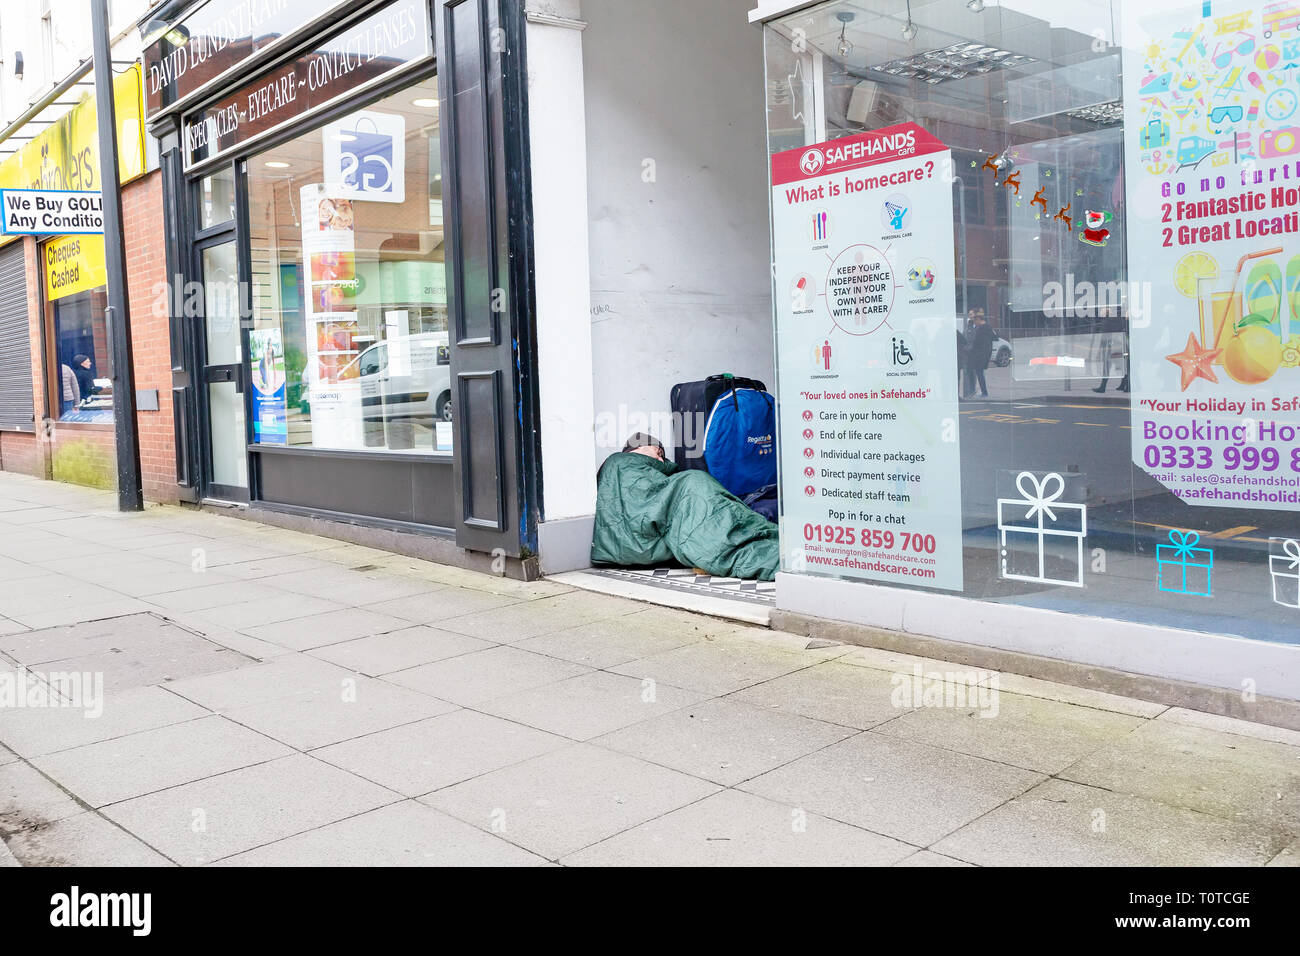 Homeless man sleeps rough in a shop doorway in Warrington Town Centre, Cheshire, UK Stock Photo